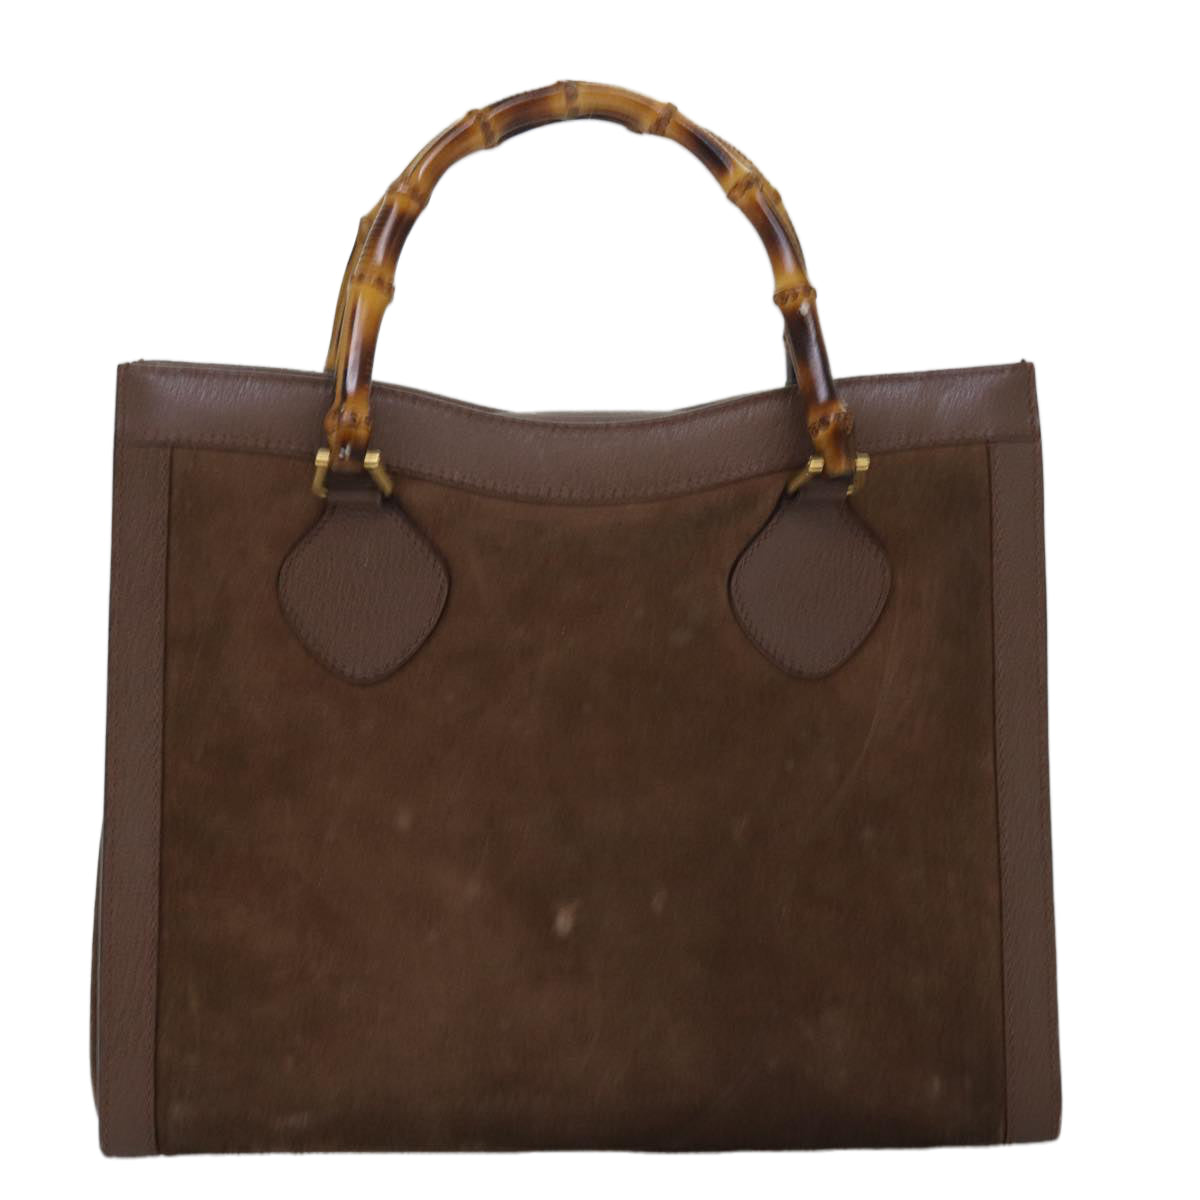 GUCCI Bamboo Tote Bag Suede Brown 002 2853 0260 0 Auth 75116 - 0